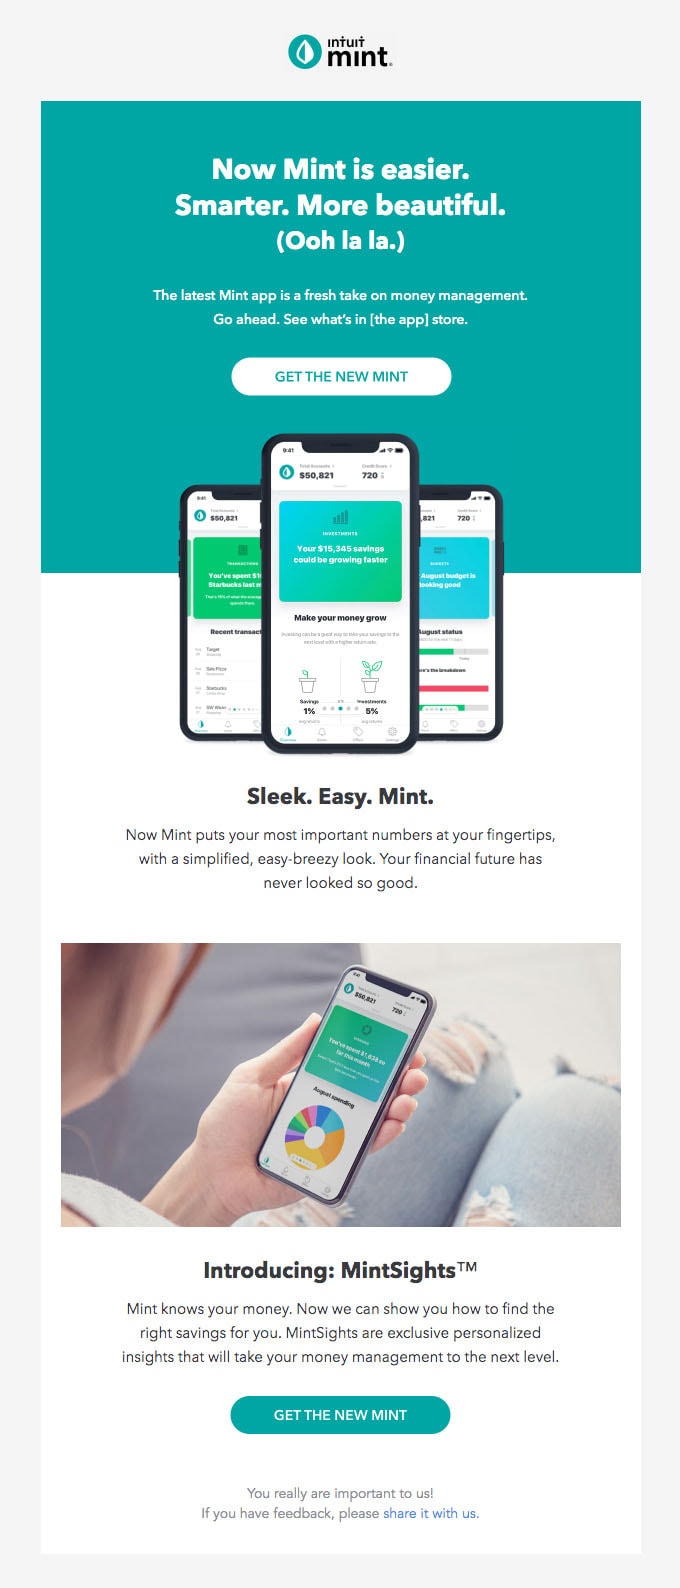 Product update email from Mint